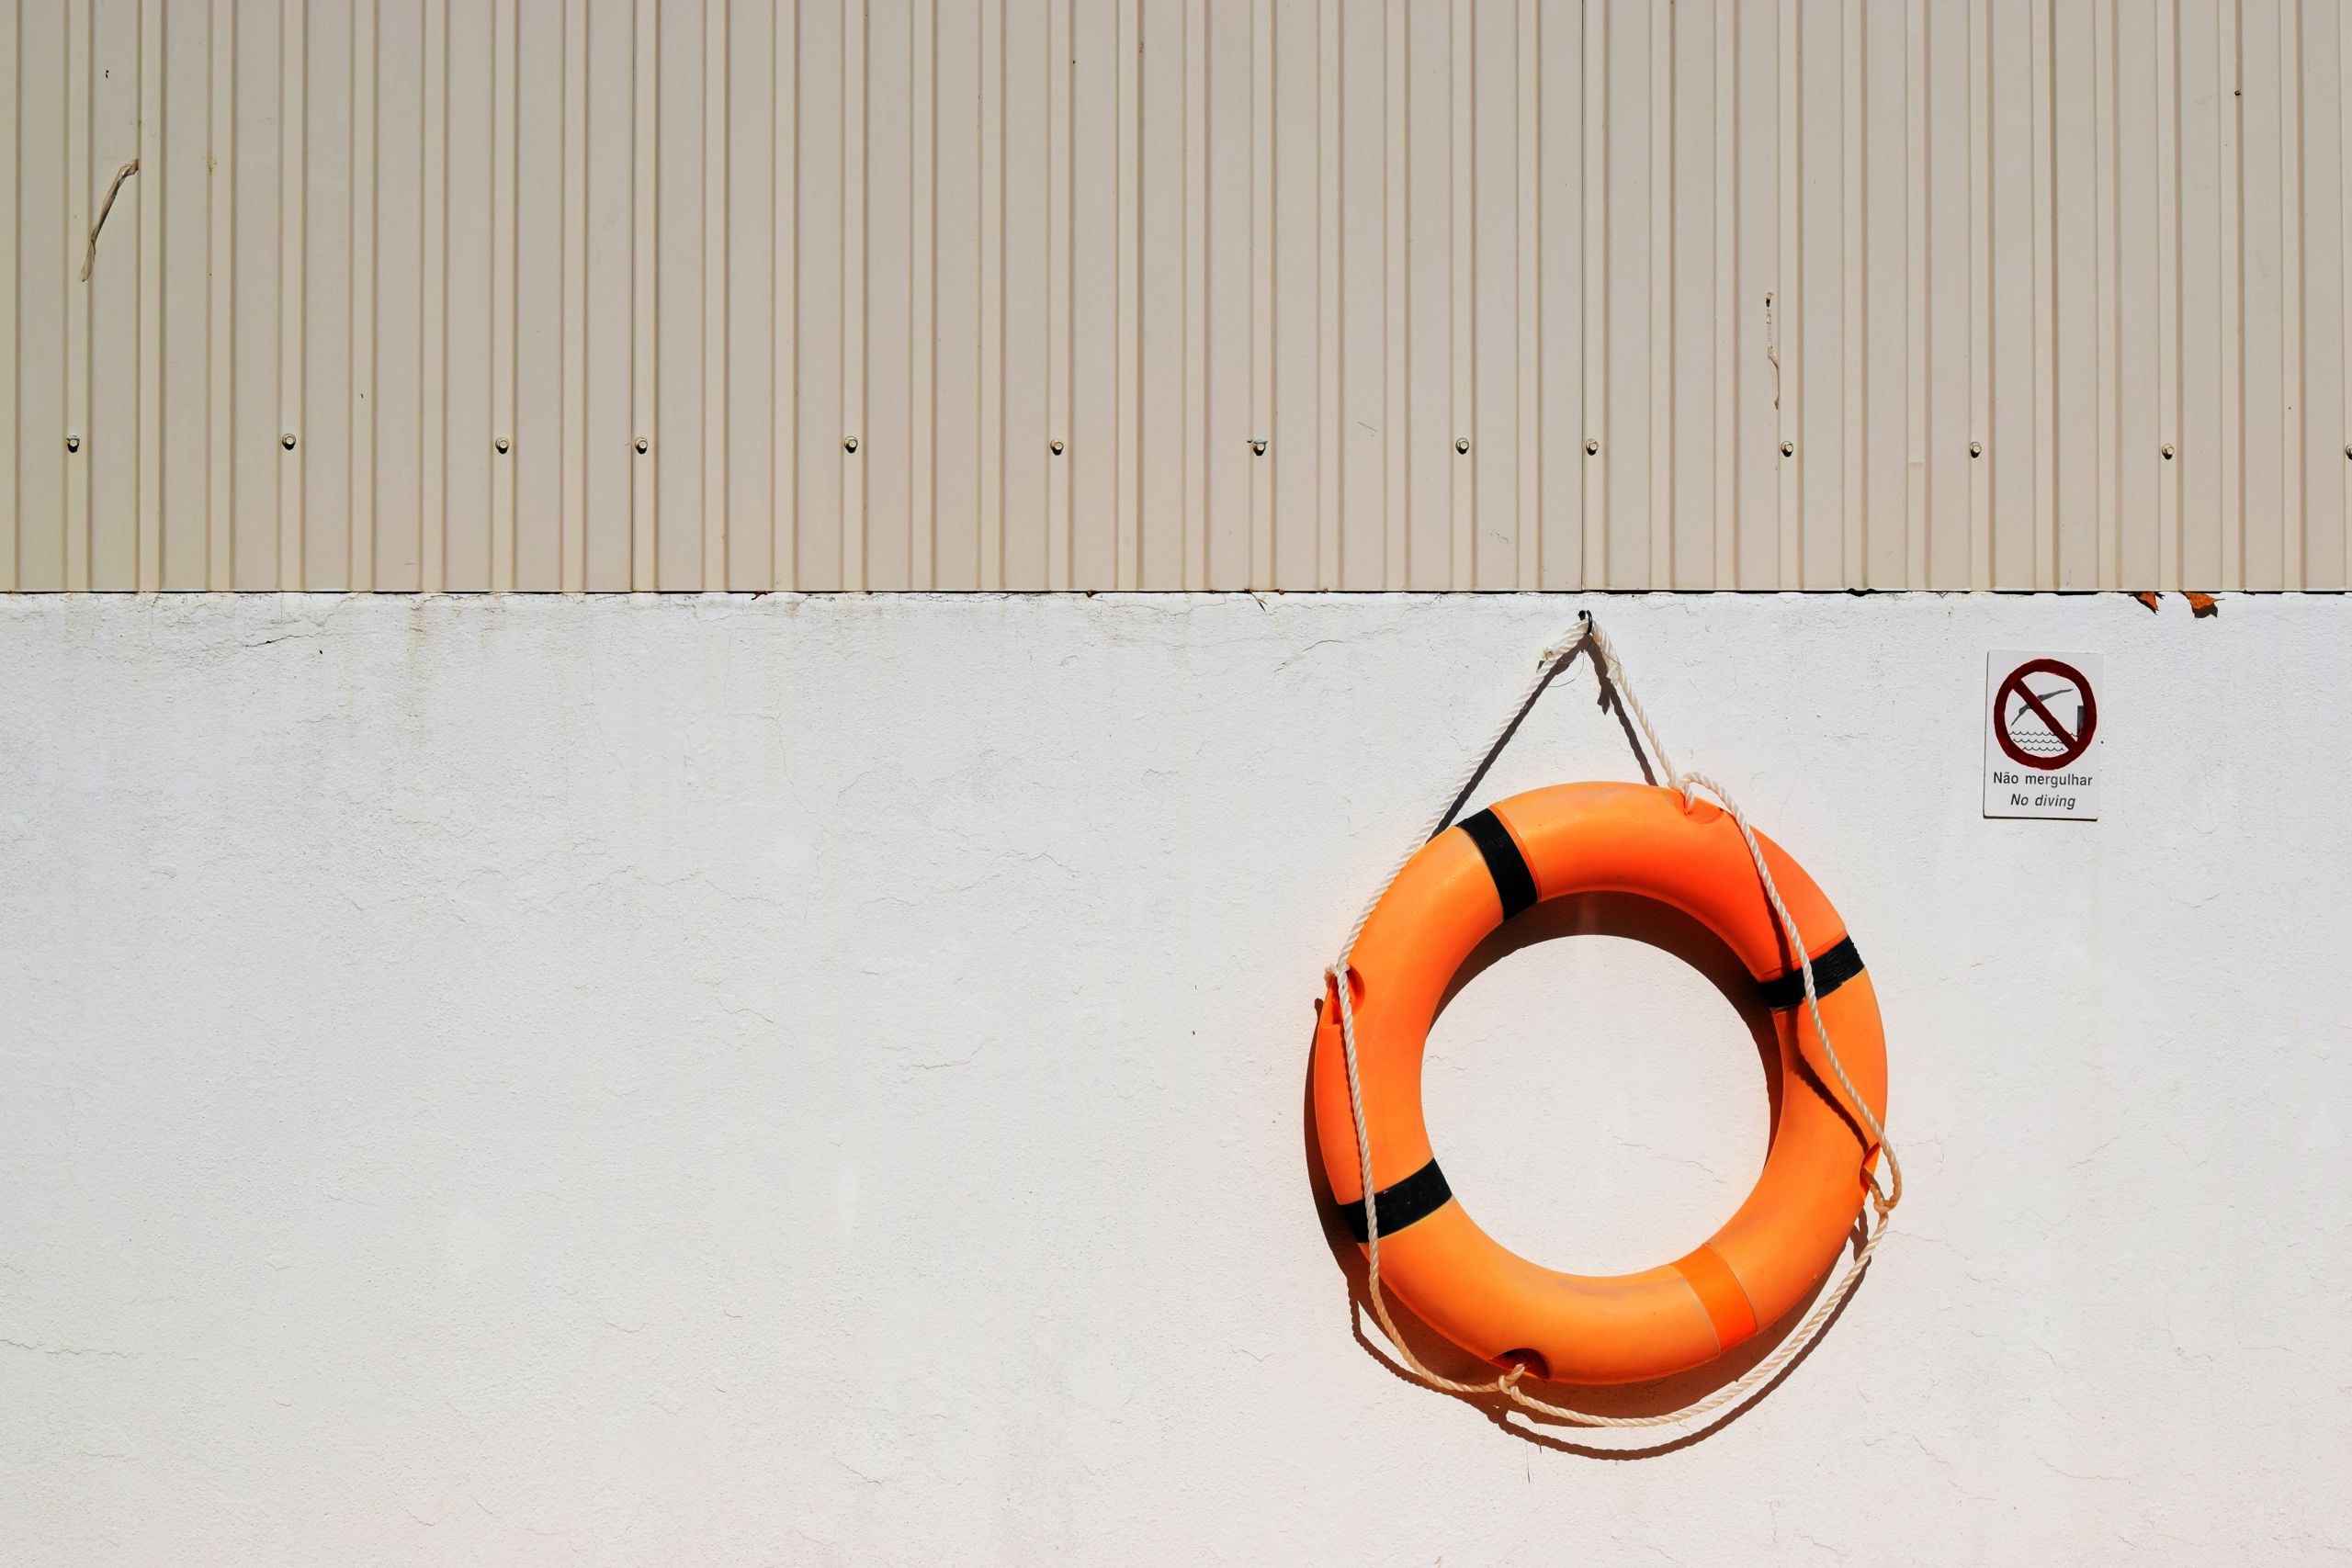 Support in a form of a circular life buoy.